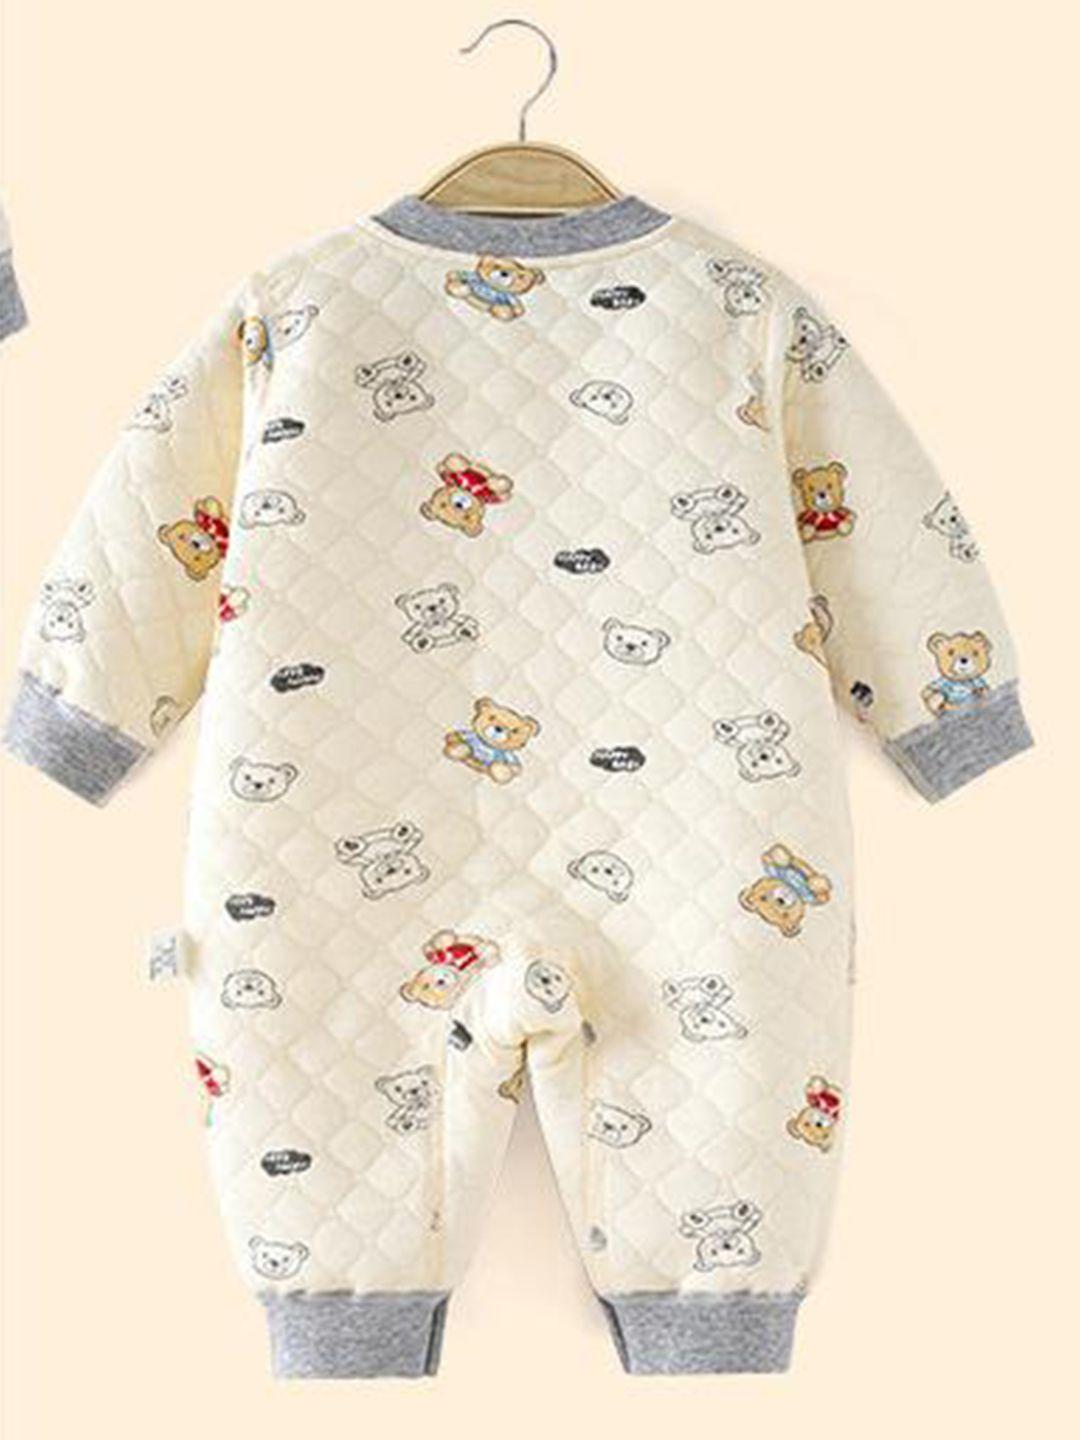 stylecast-infant-boys-printed-cotton-rompers